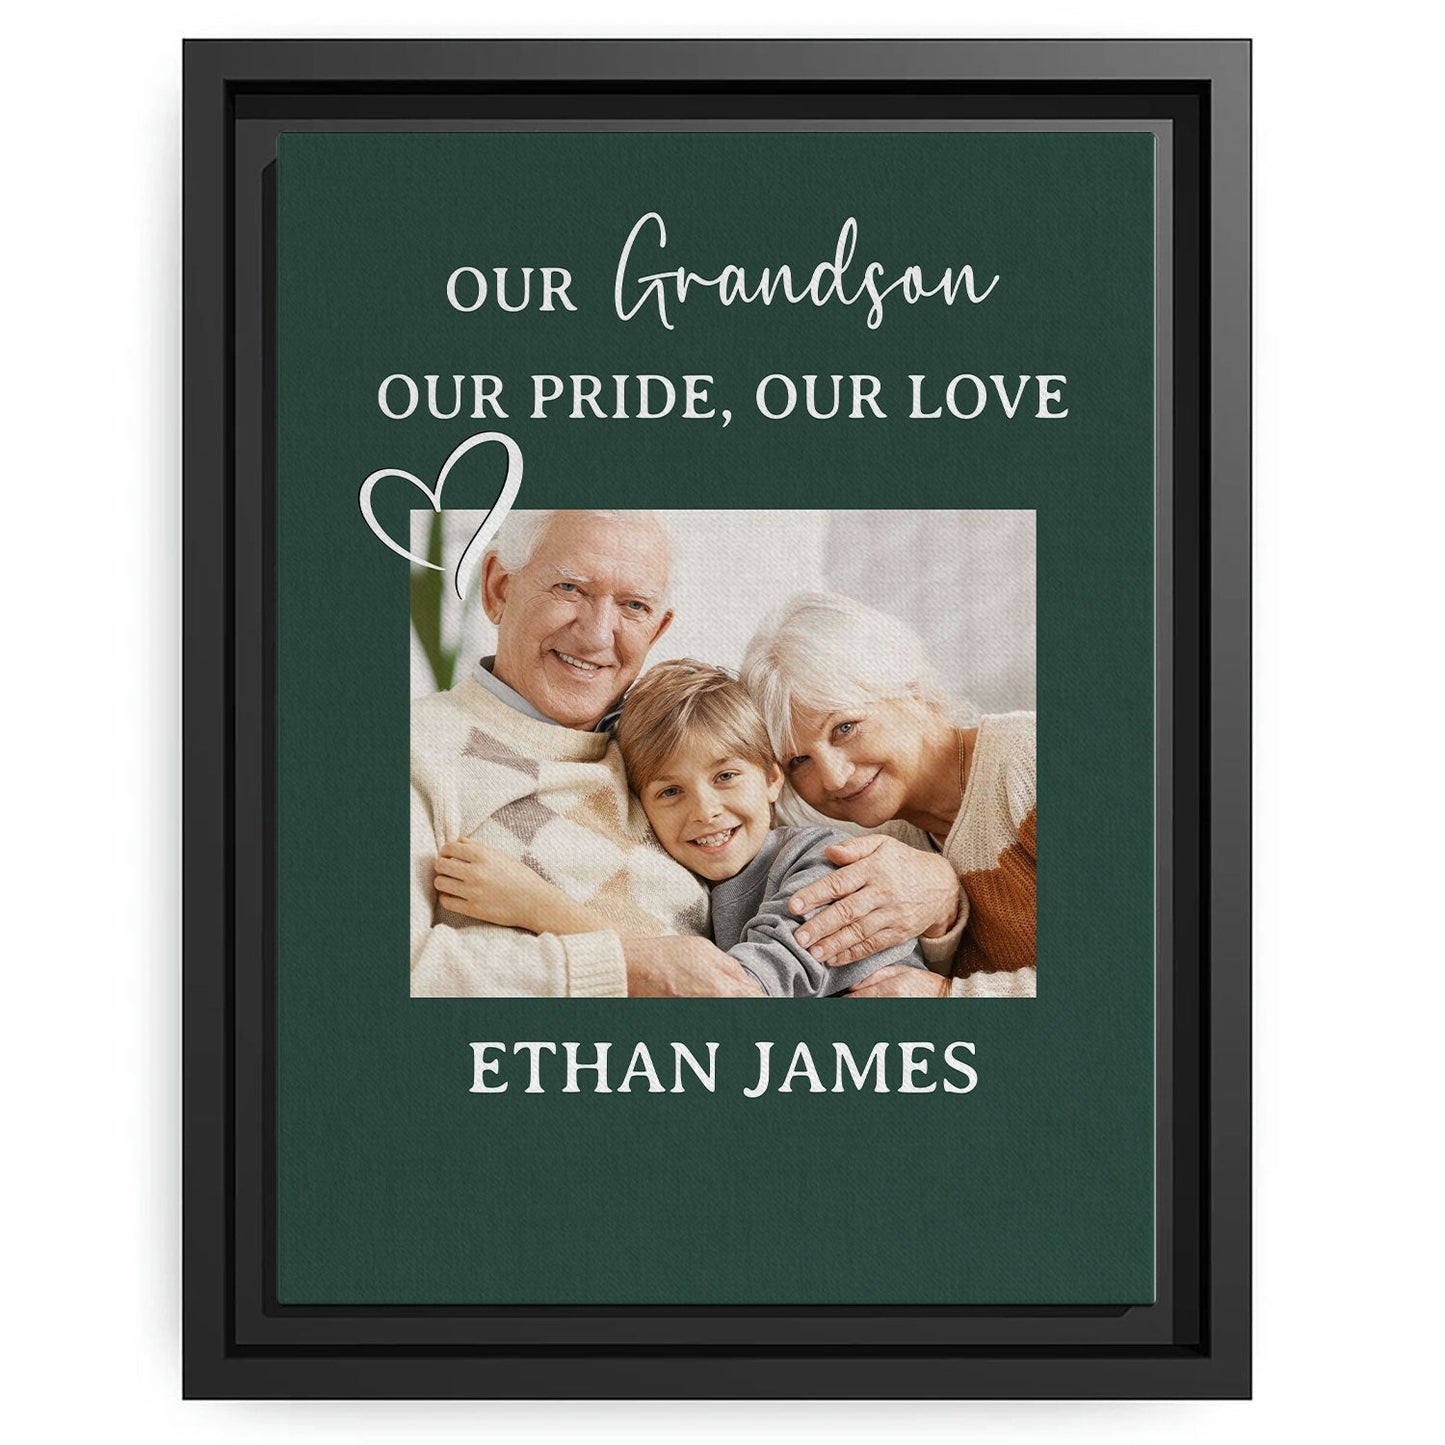 Our Grandson, Our Pride, Our Love - Personalized Birthday or Christmas gift For Grandson - Custom Canvas Print - MyMindfulGifts